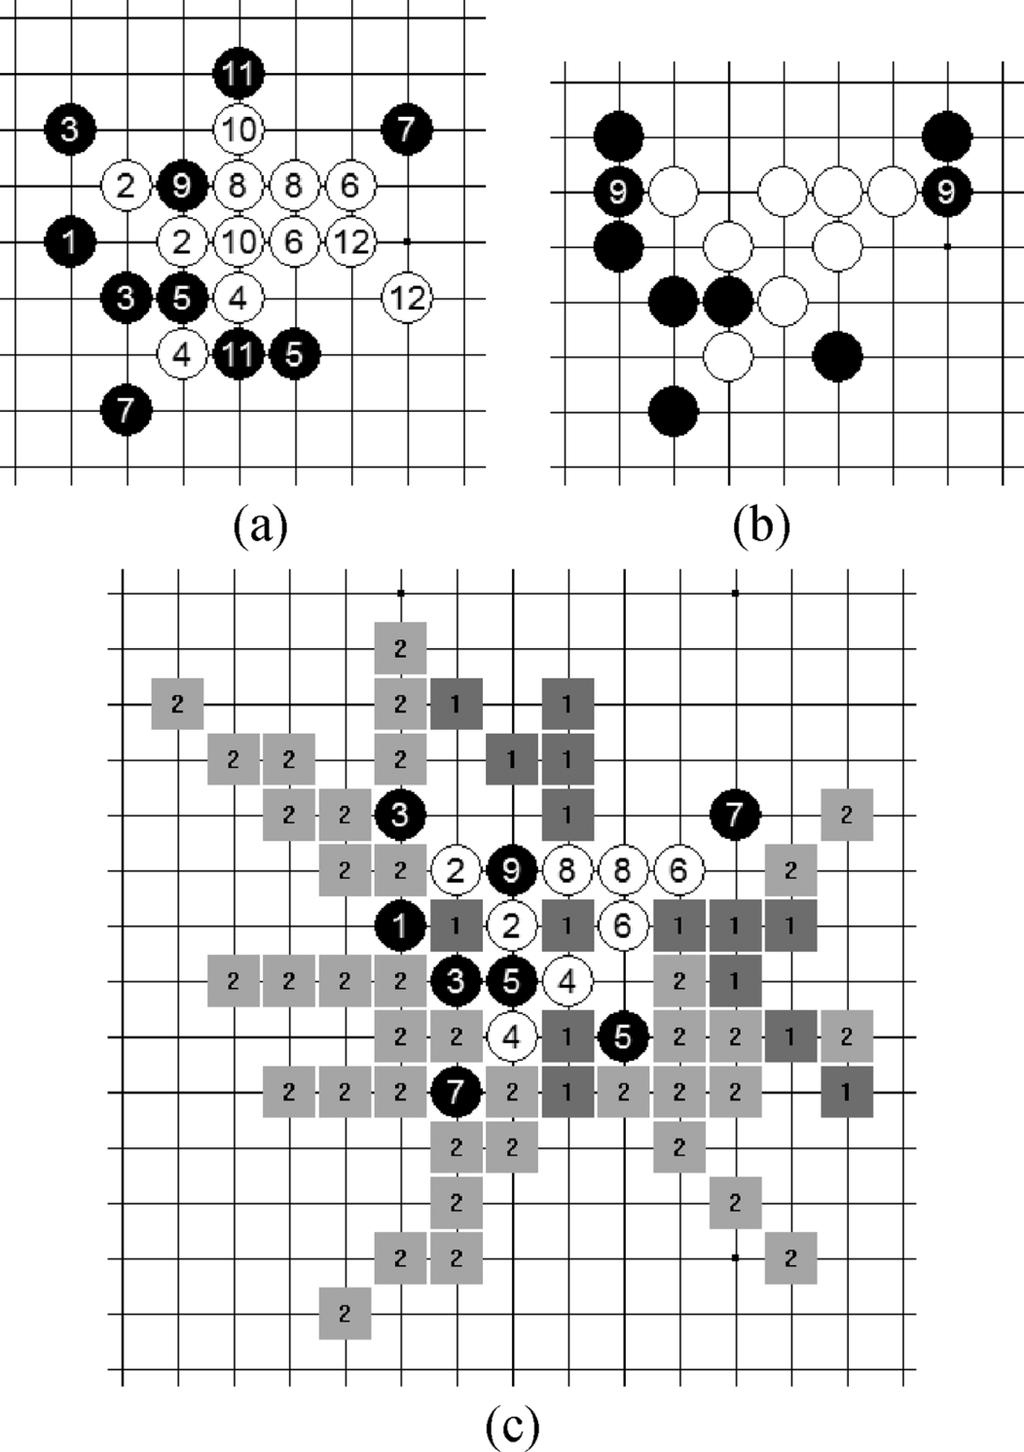 WU AND LIN: RELEVANCE-ZONE-ORIENTED PROOF SEARCH FOR Connect6 201 Fig 17 (a) VCDT for the seminull move 9 (b) Relaxed critical defense at 9 (c) Constructed zones for the seminull move 9 in (a)